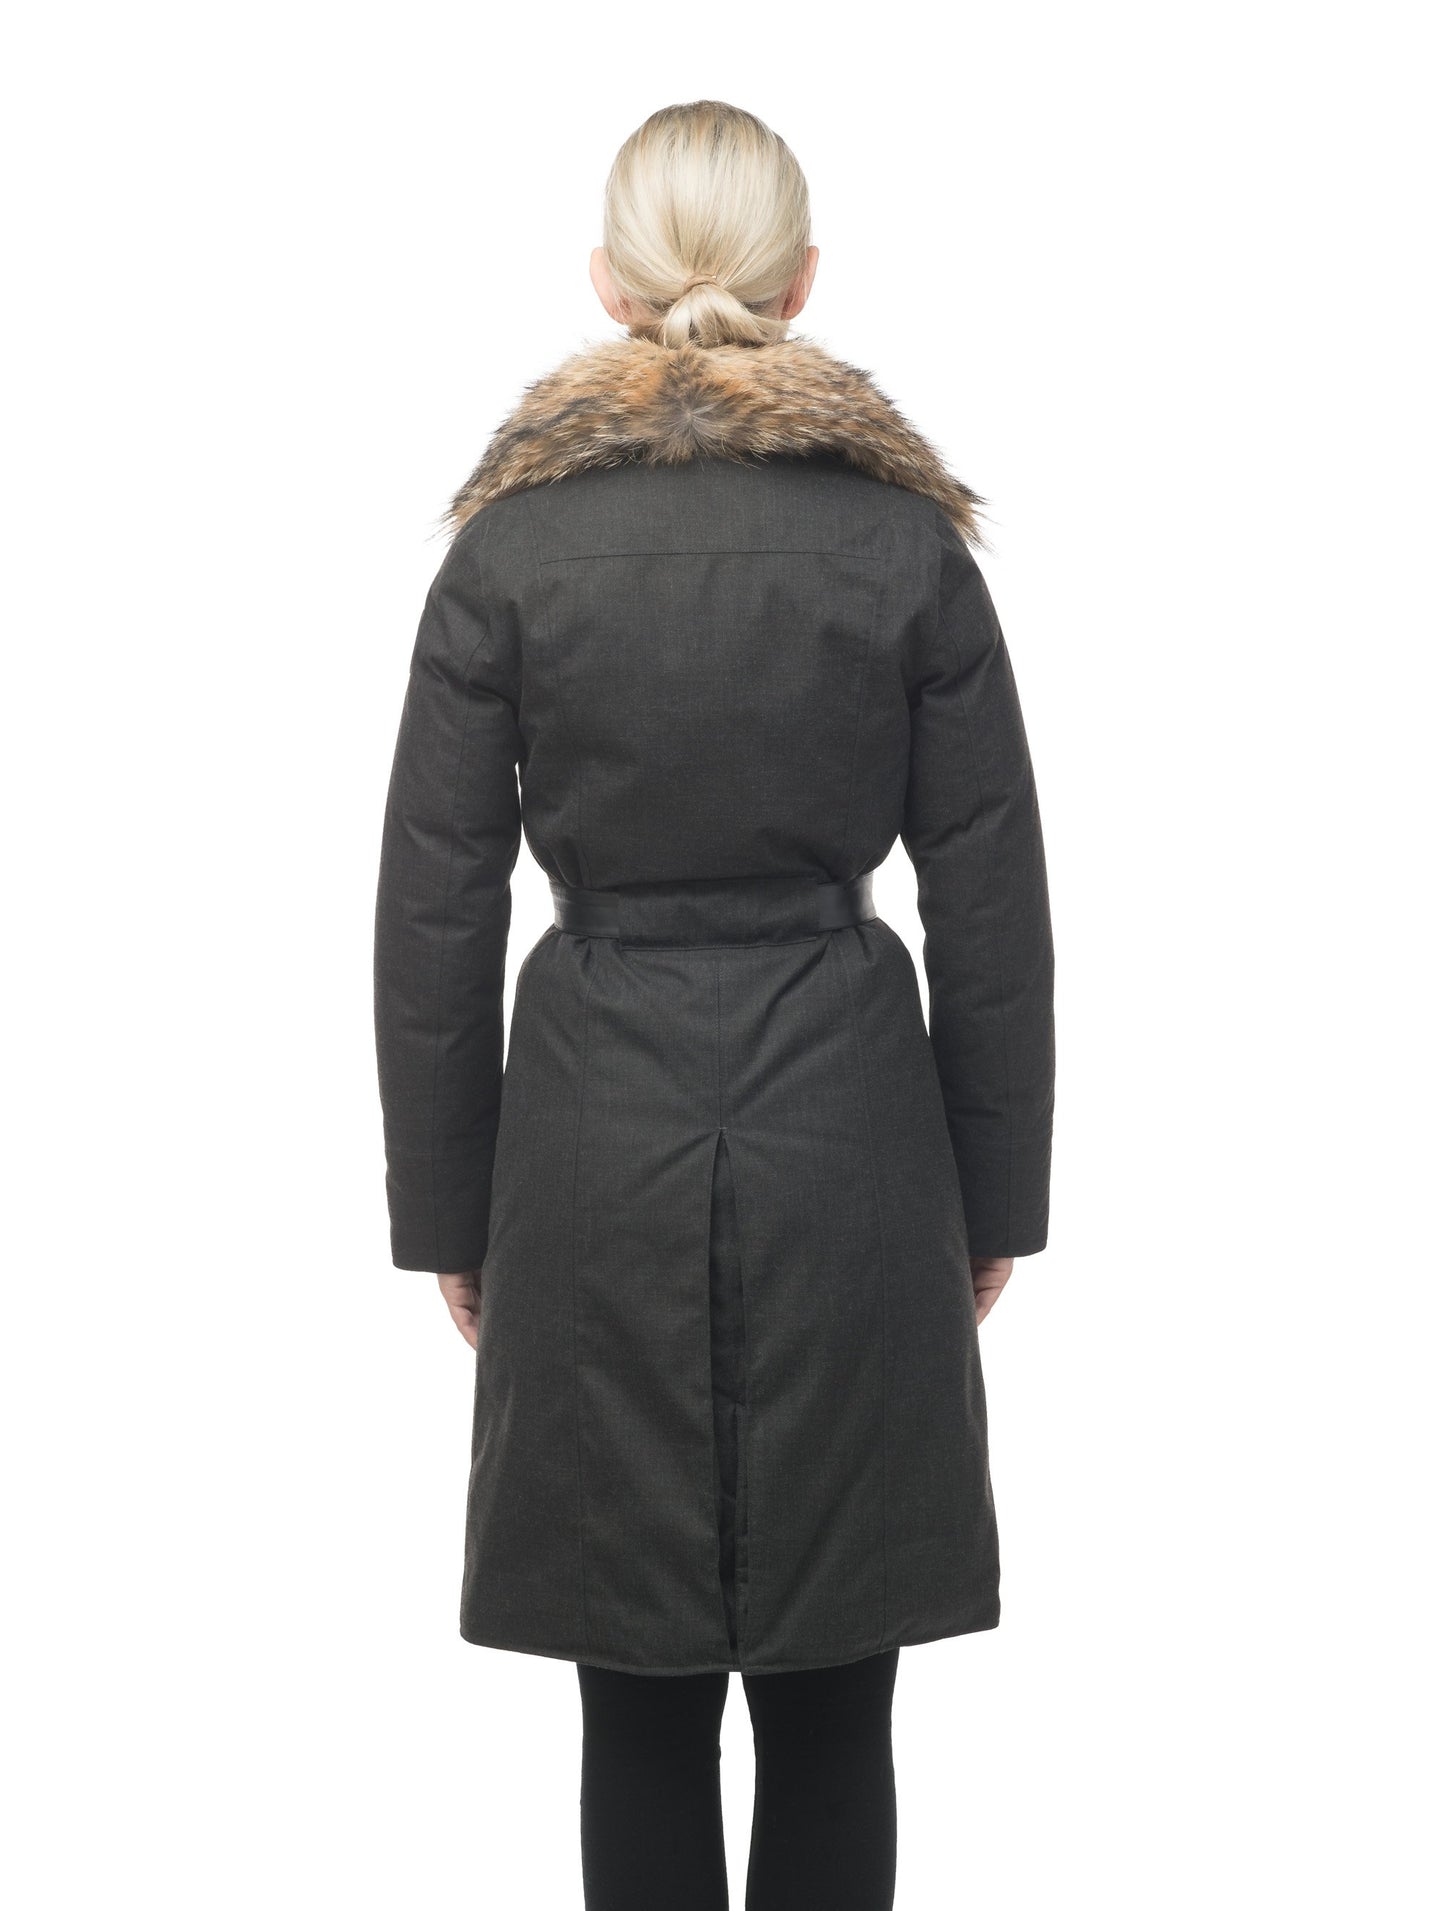 Women's lightweight down filled parka with a removable fur collar and a washable, Japanese DWR Leather belt in H. Charcoal, H Black, or H Burgundy